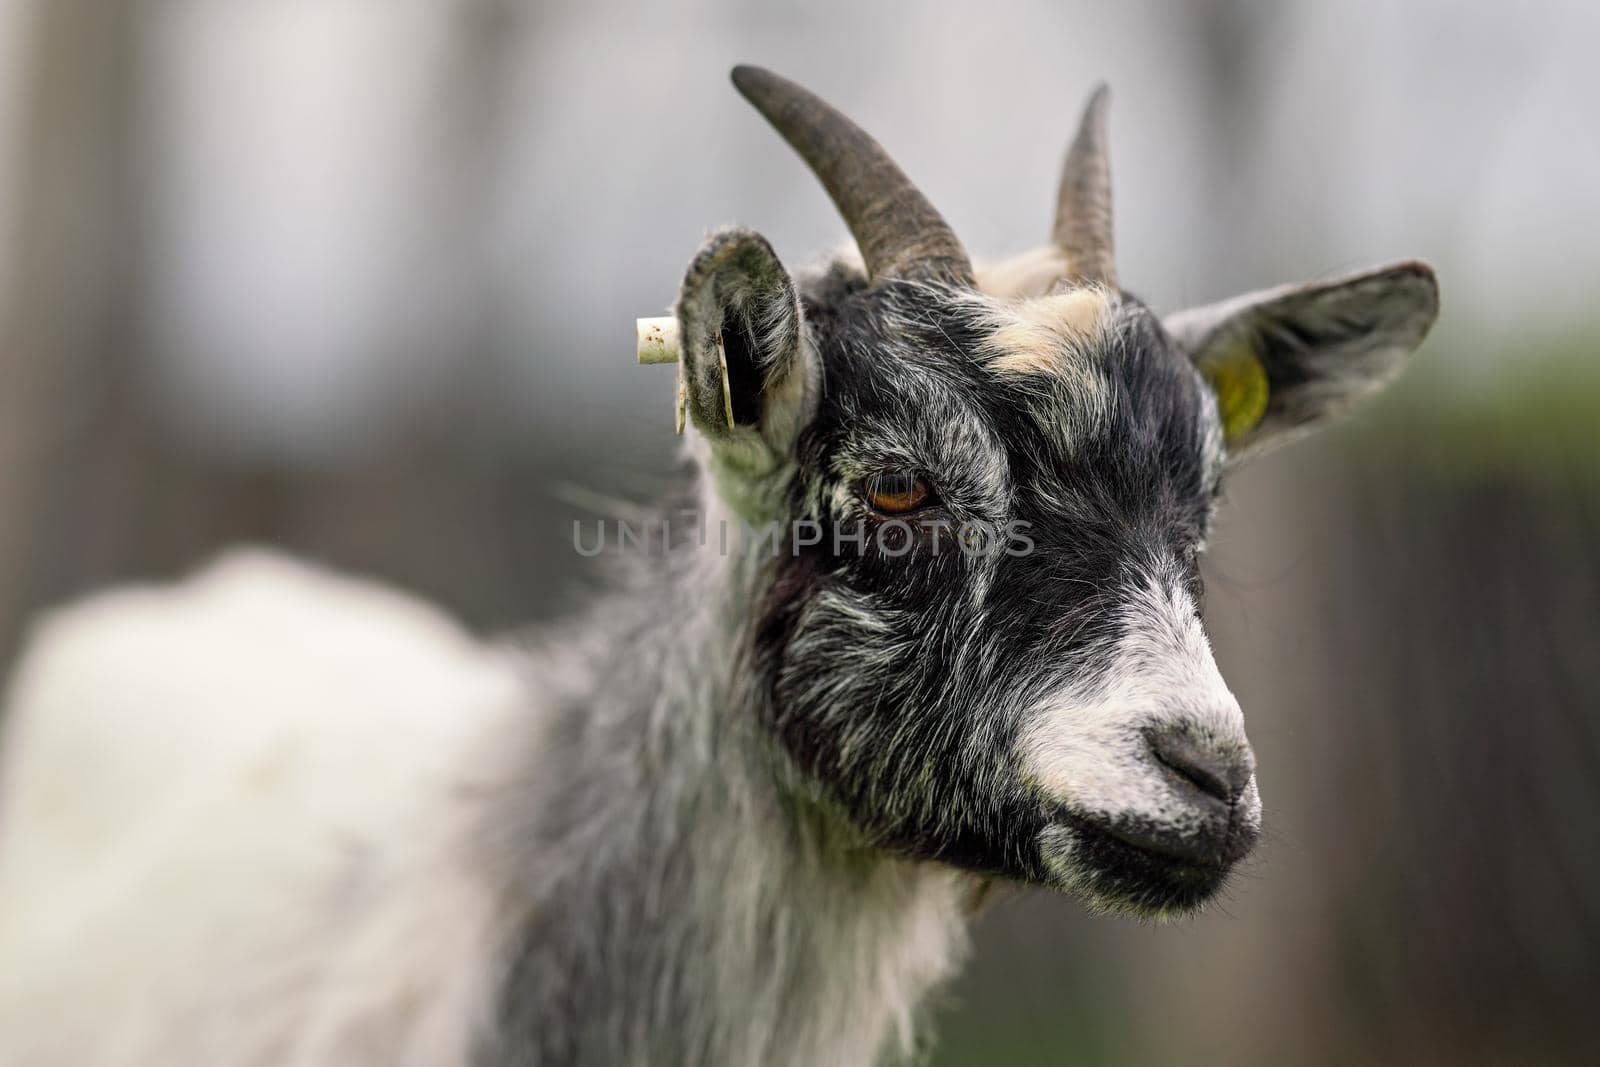 White and black american pygmy Cameroon goat closeup detail on head with horns.